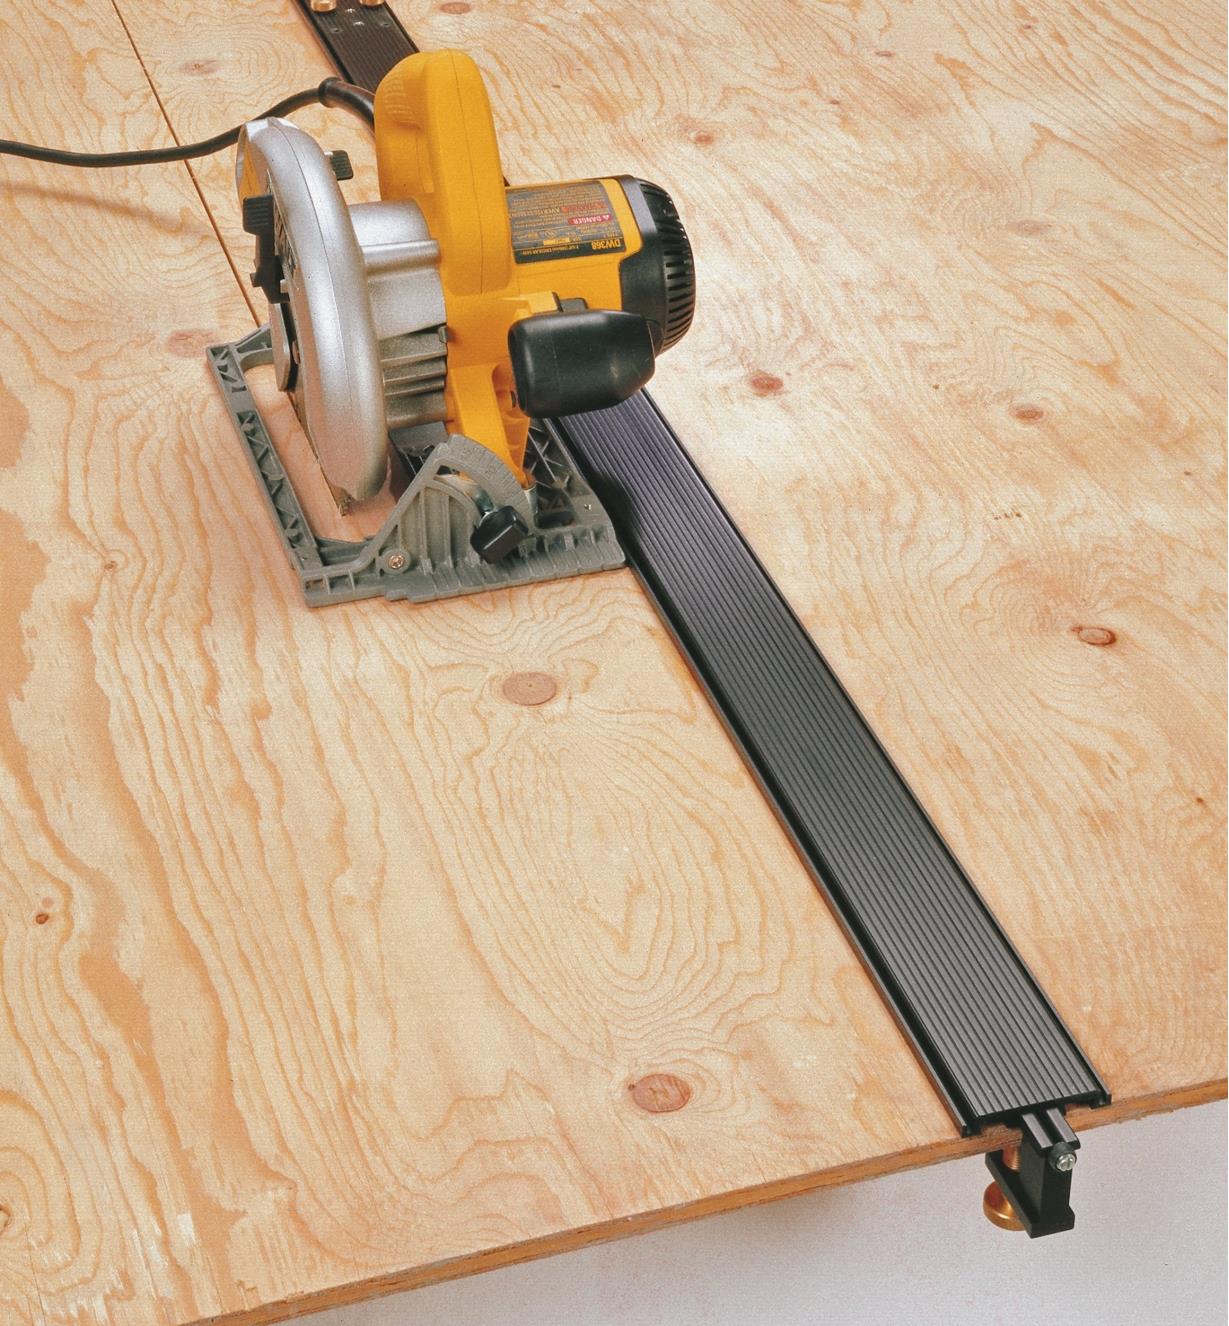 100" Power Tool Guide clamped to a sheet of plywood, guiding a circular saw